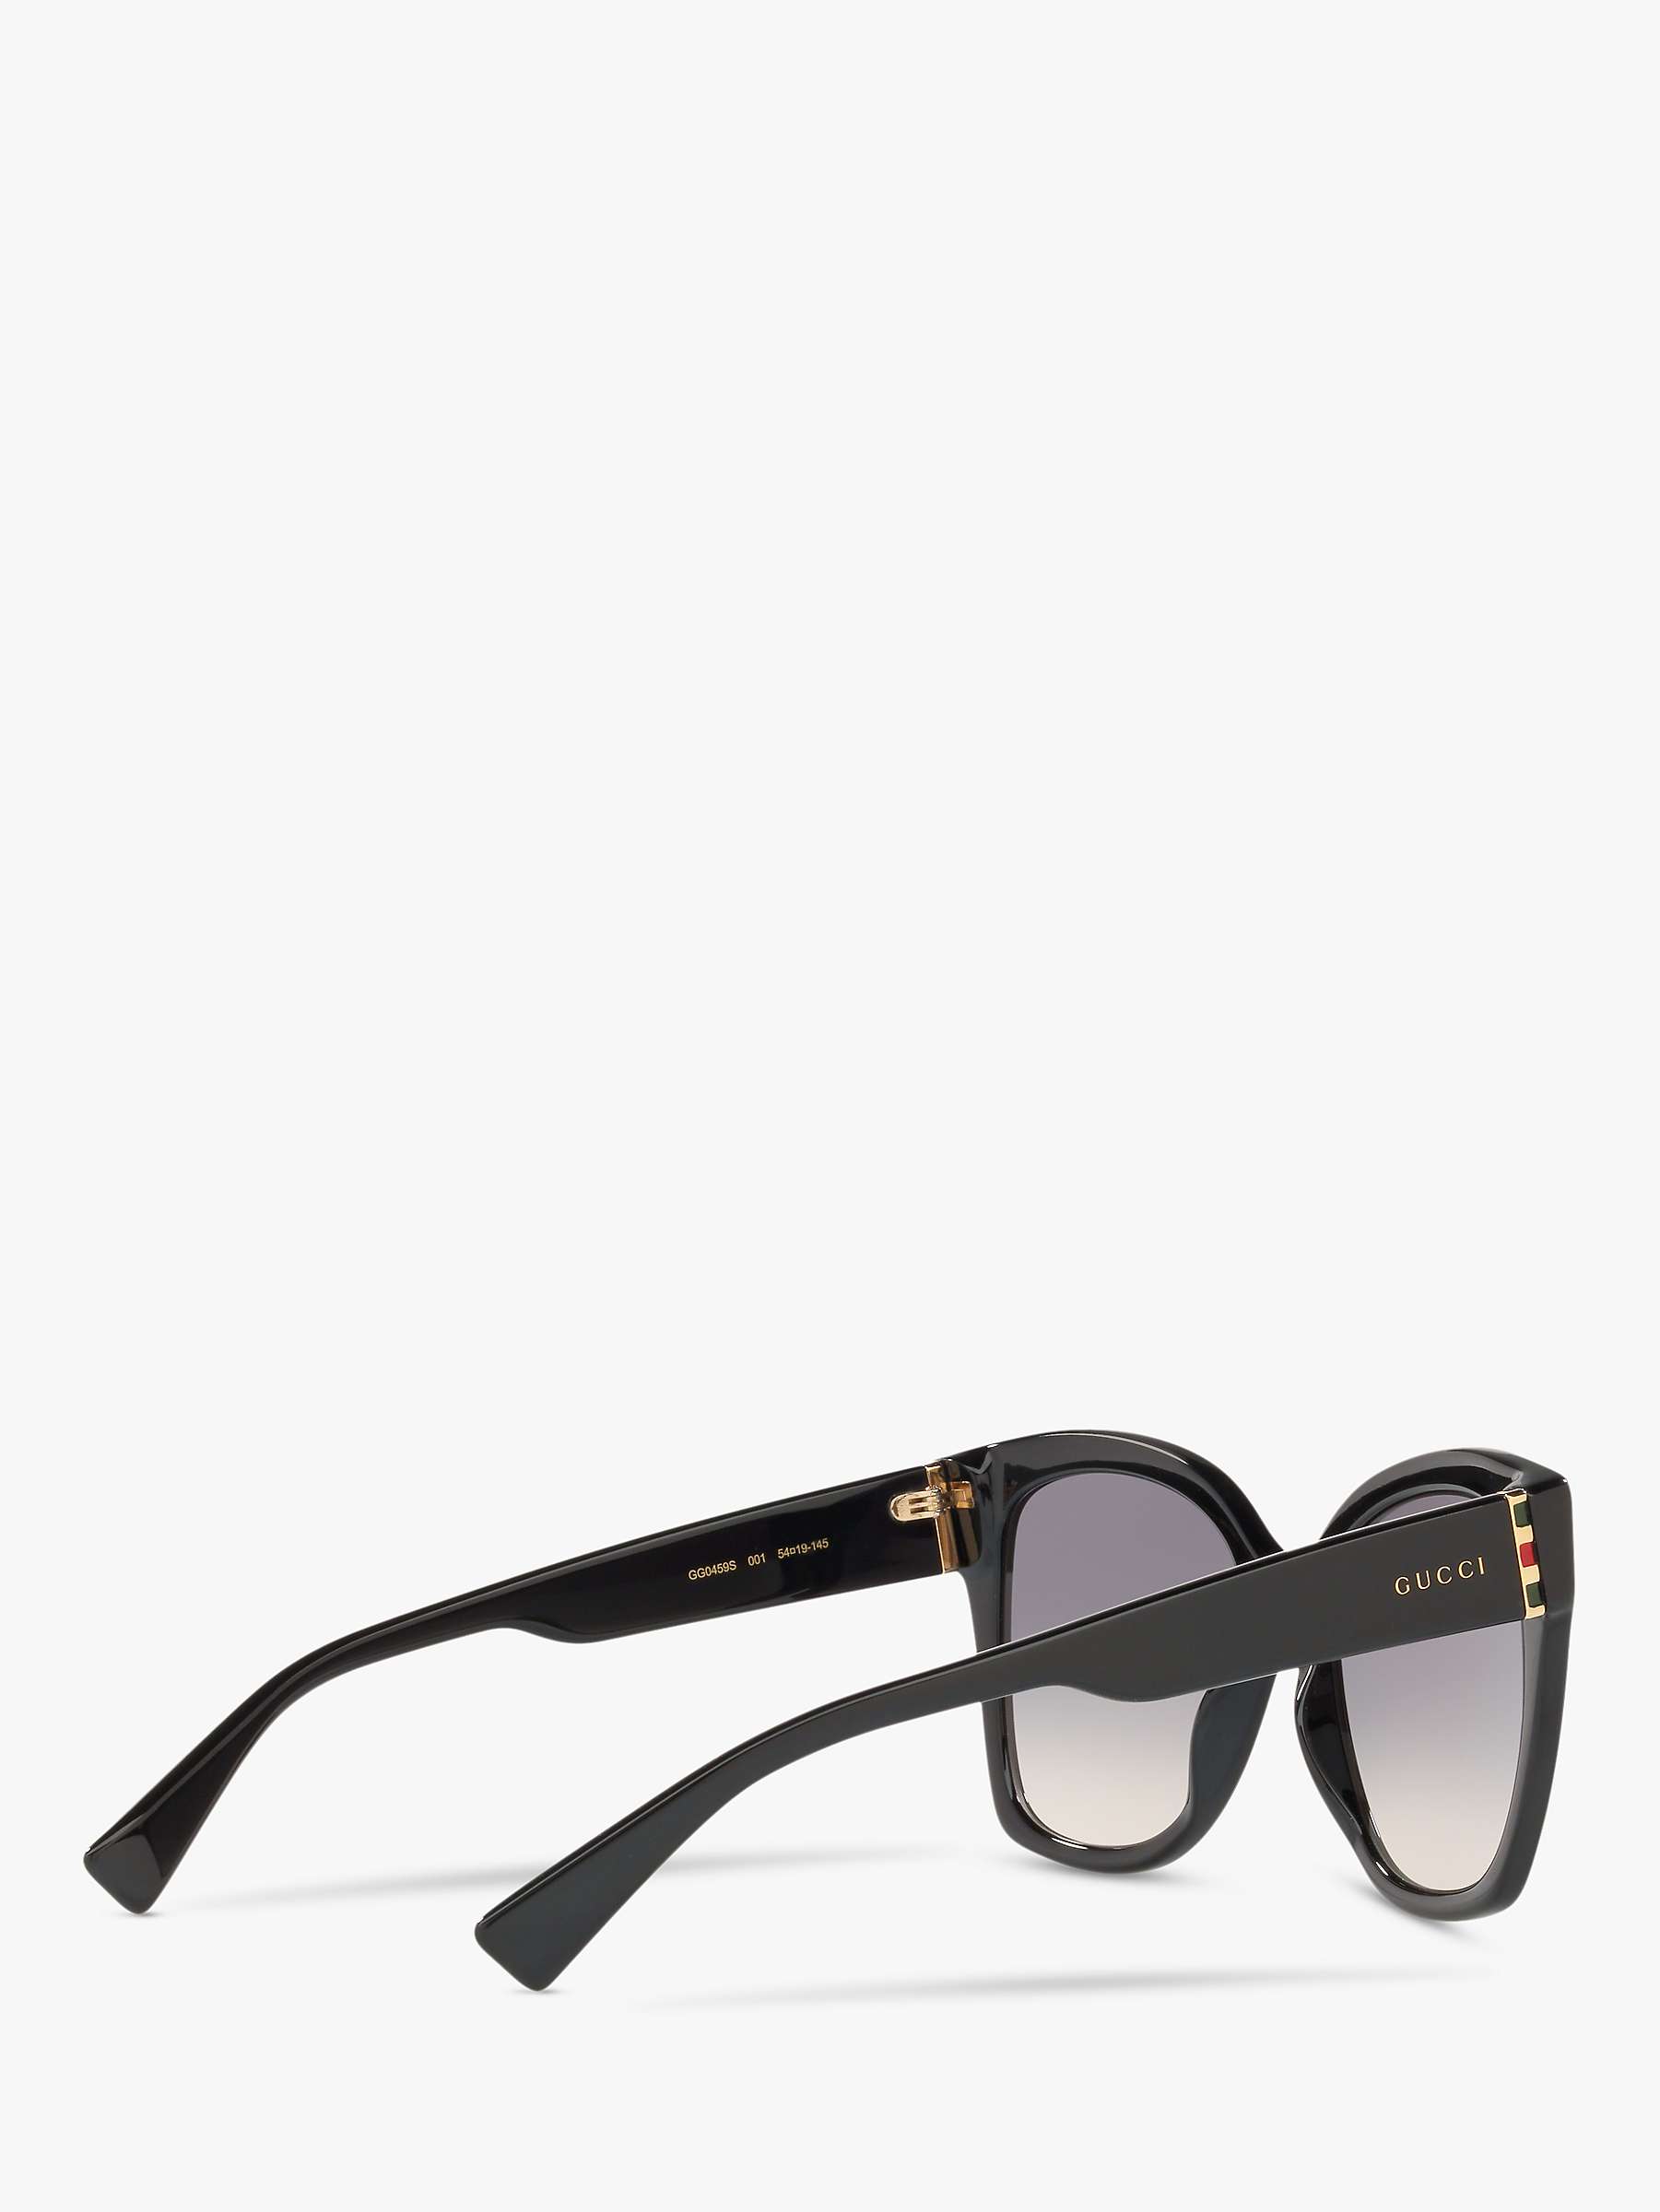 Buy Gucci GG0459S Women's Square Sunglasses Online at johnlewis.com